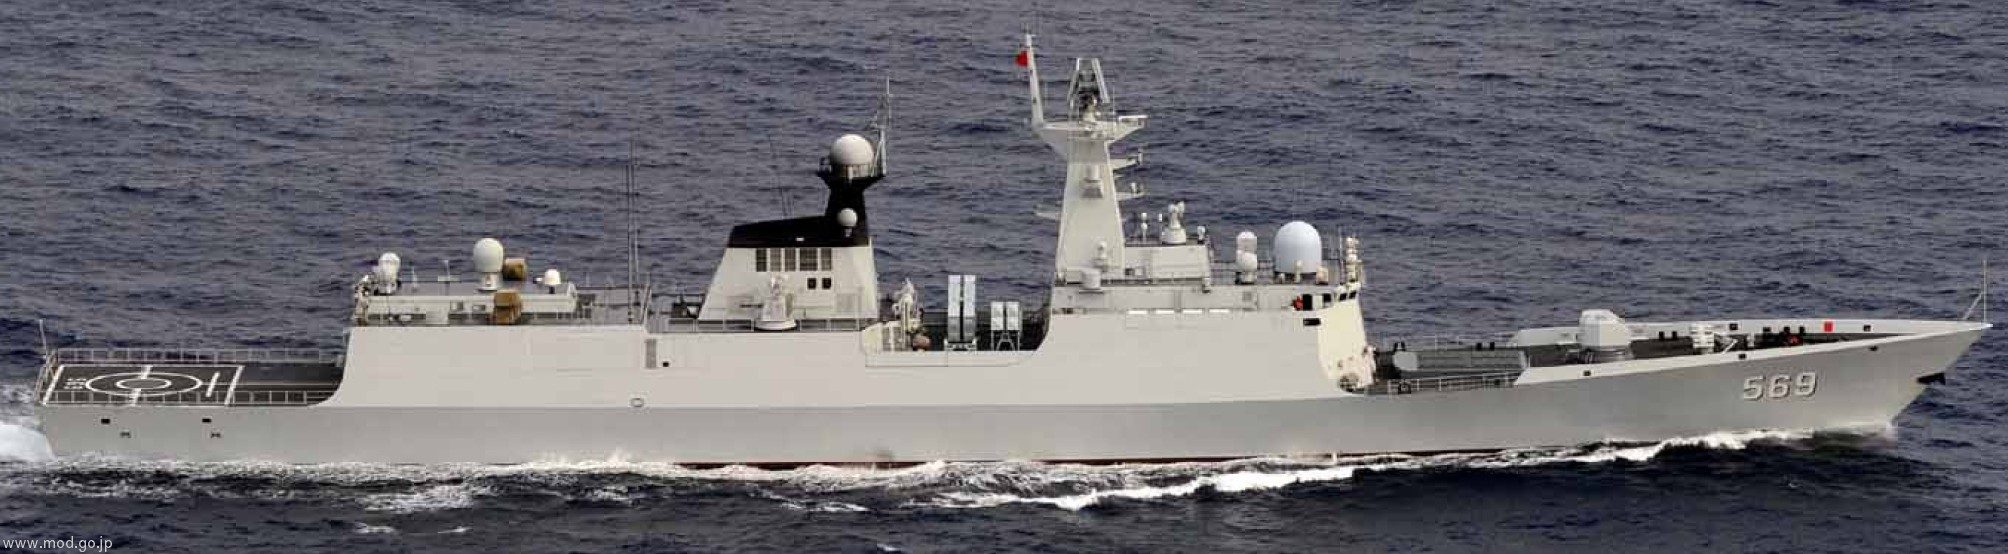 ffg-569 plans yulin type 054a jiangkai ii class guided missile frigate china people's liberation army navy 02